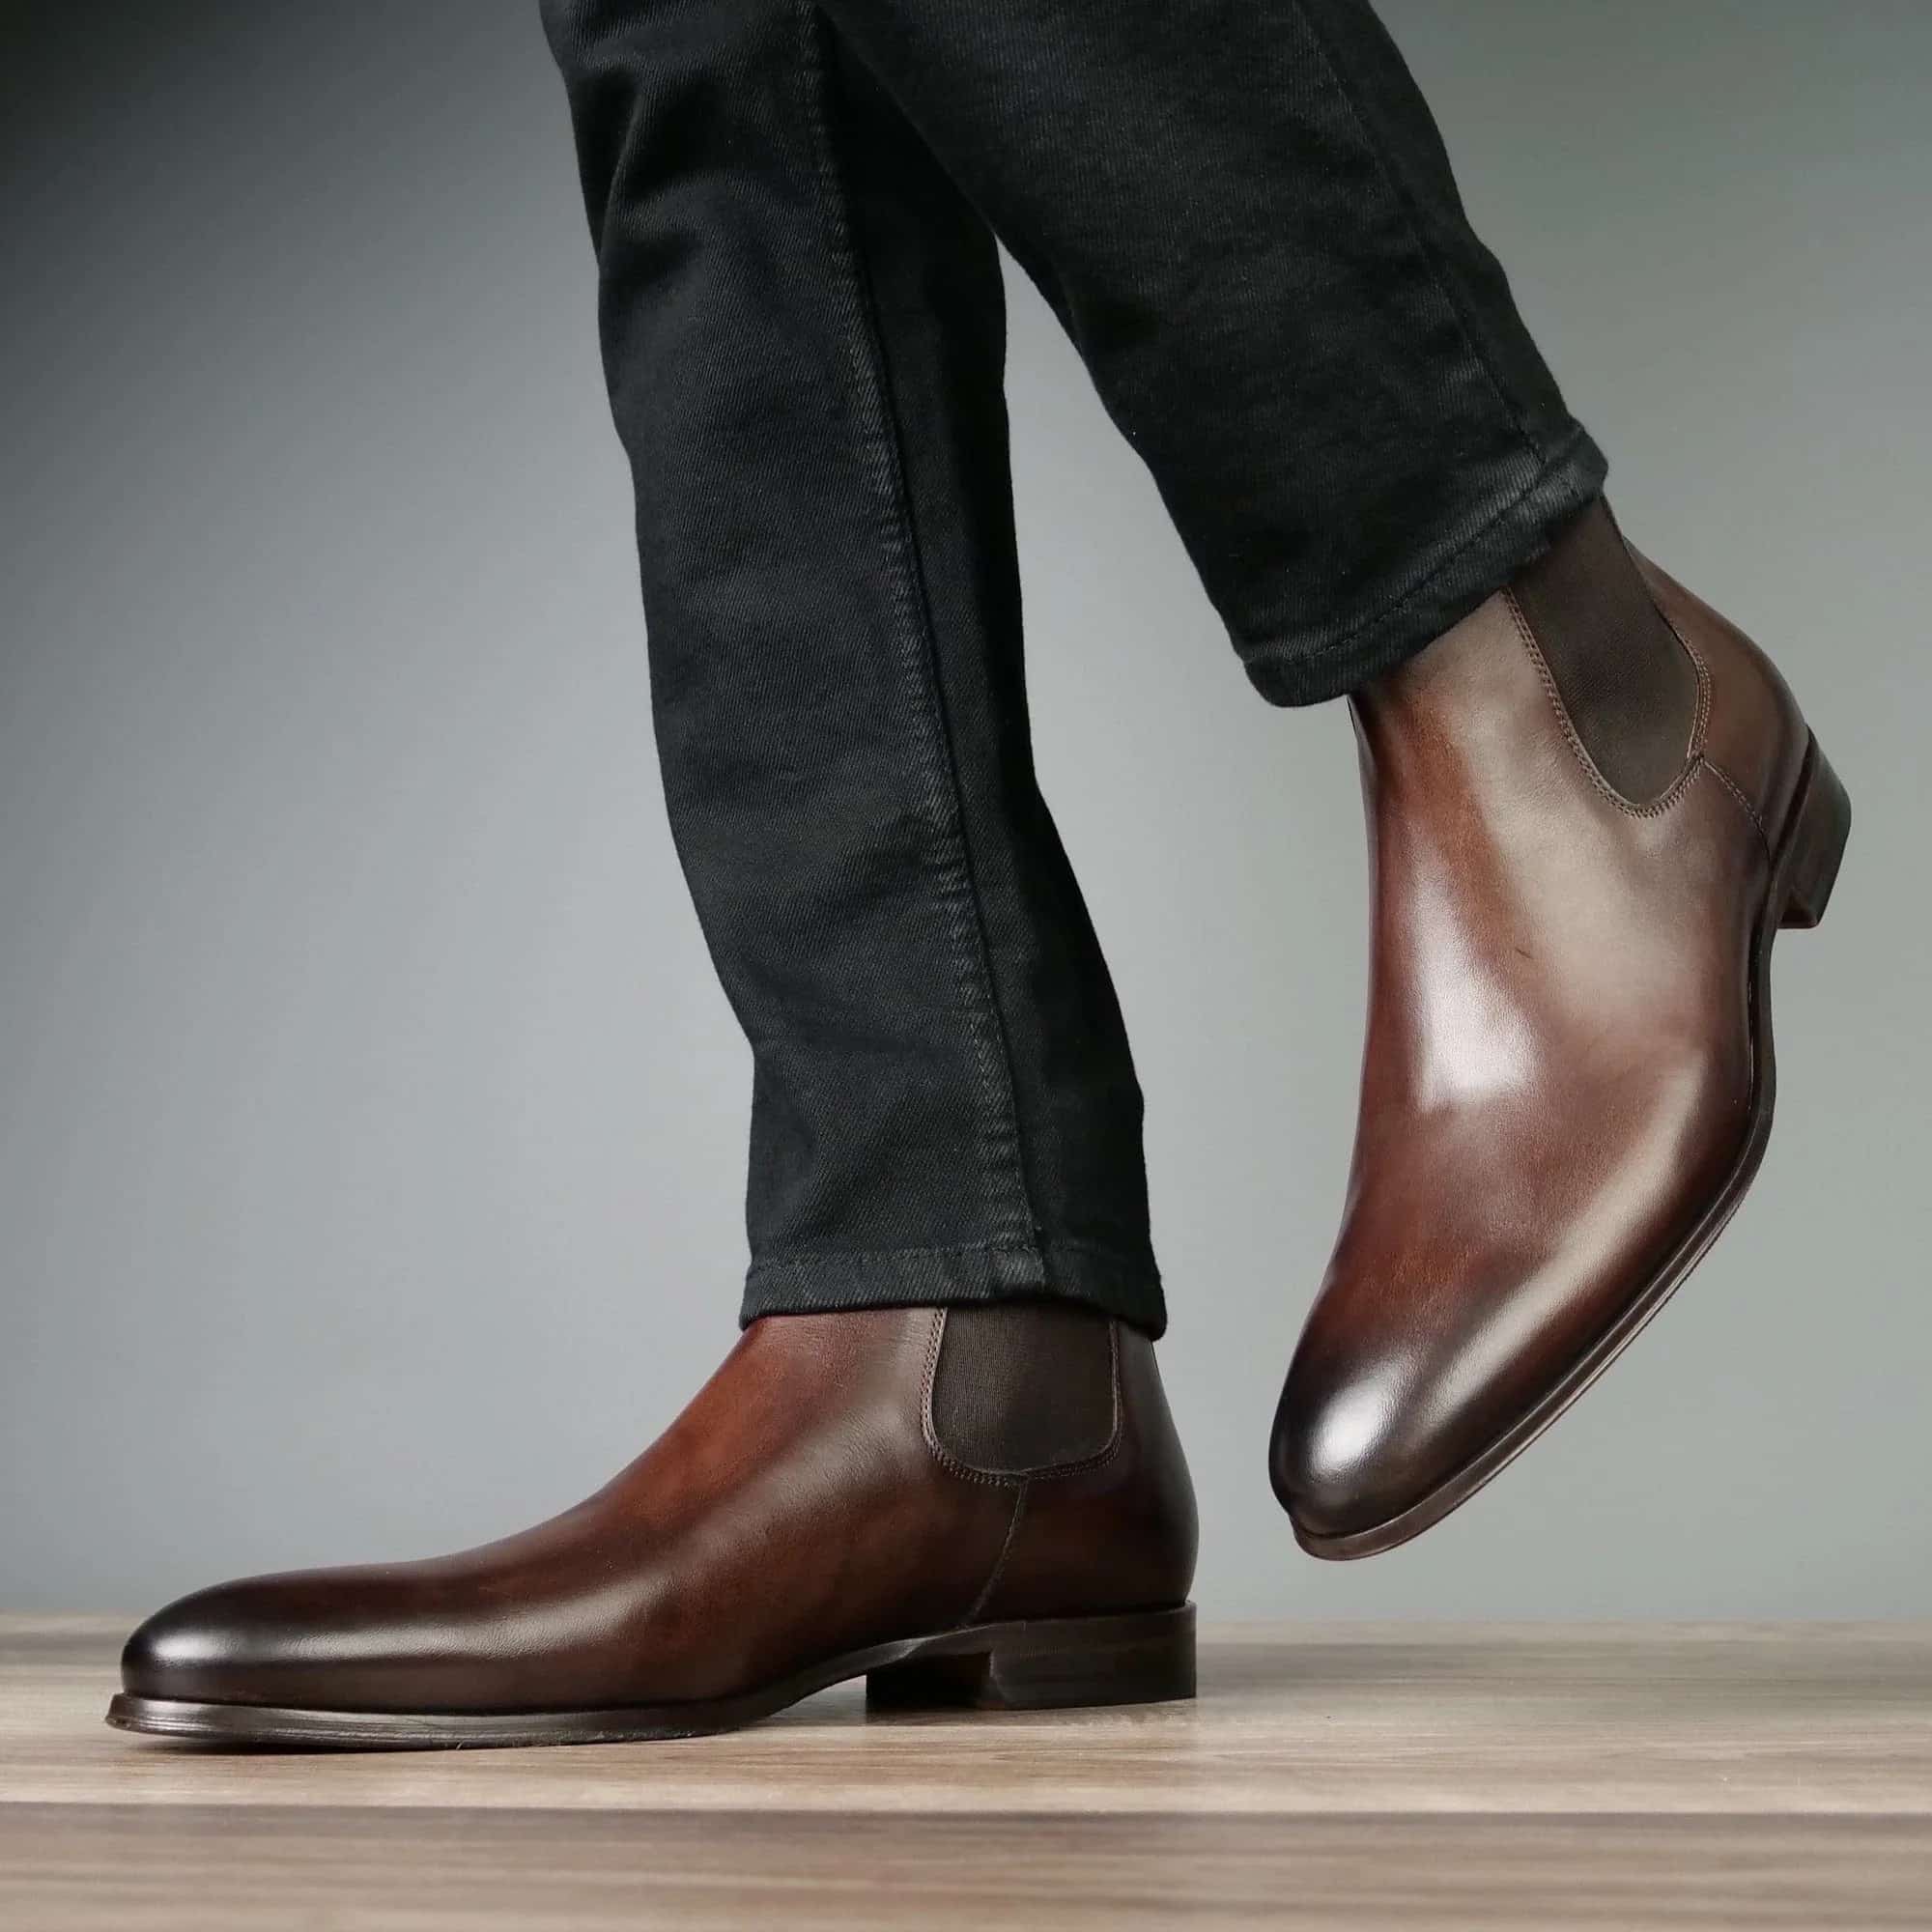 Breaking Fashion Rules: Can You Wear Brown Shoes with Black Pants? -  VANCHIER